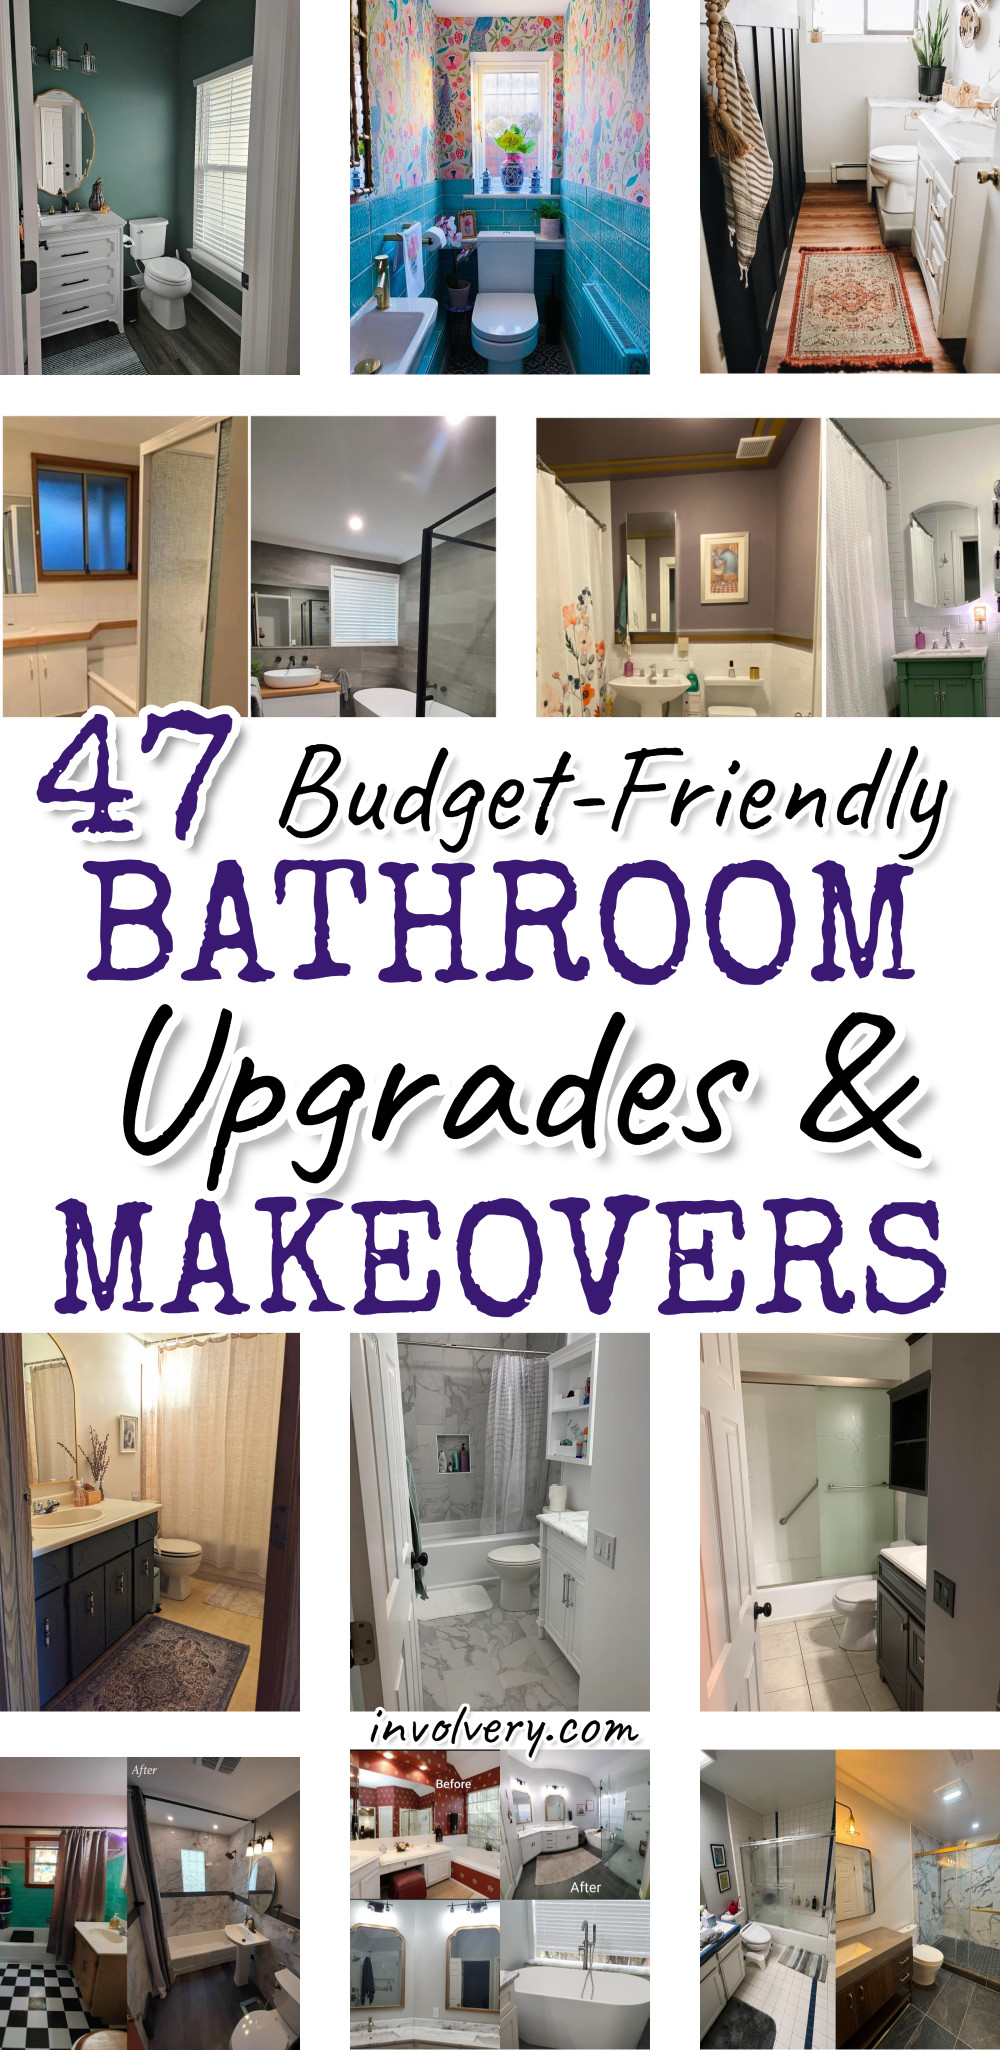 Bathroom Makeovers Before and After Budget-Friendly Upgrades